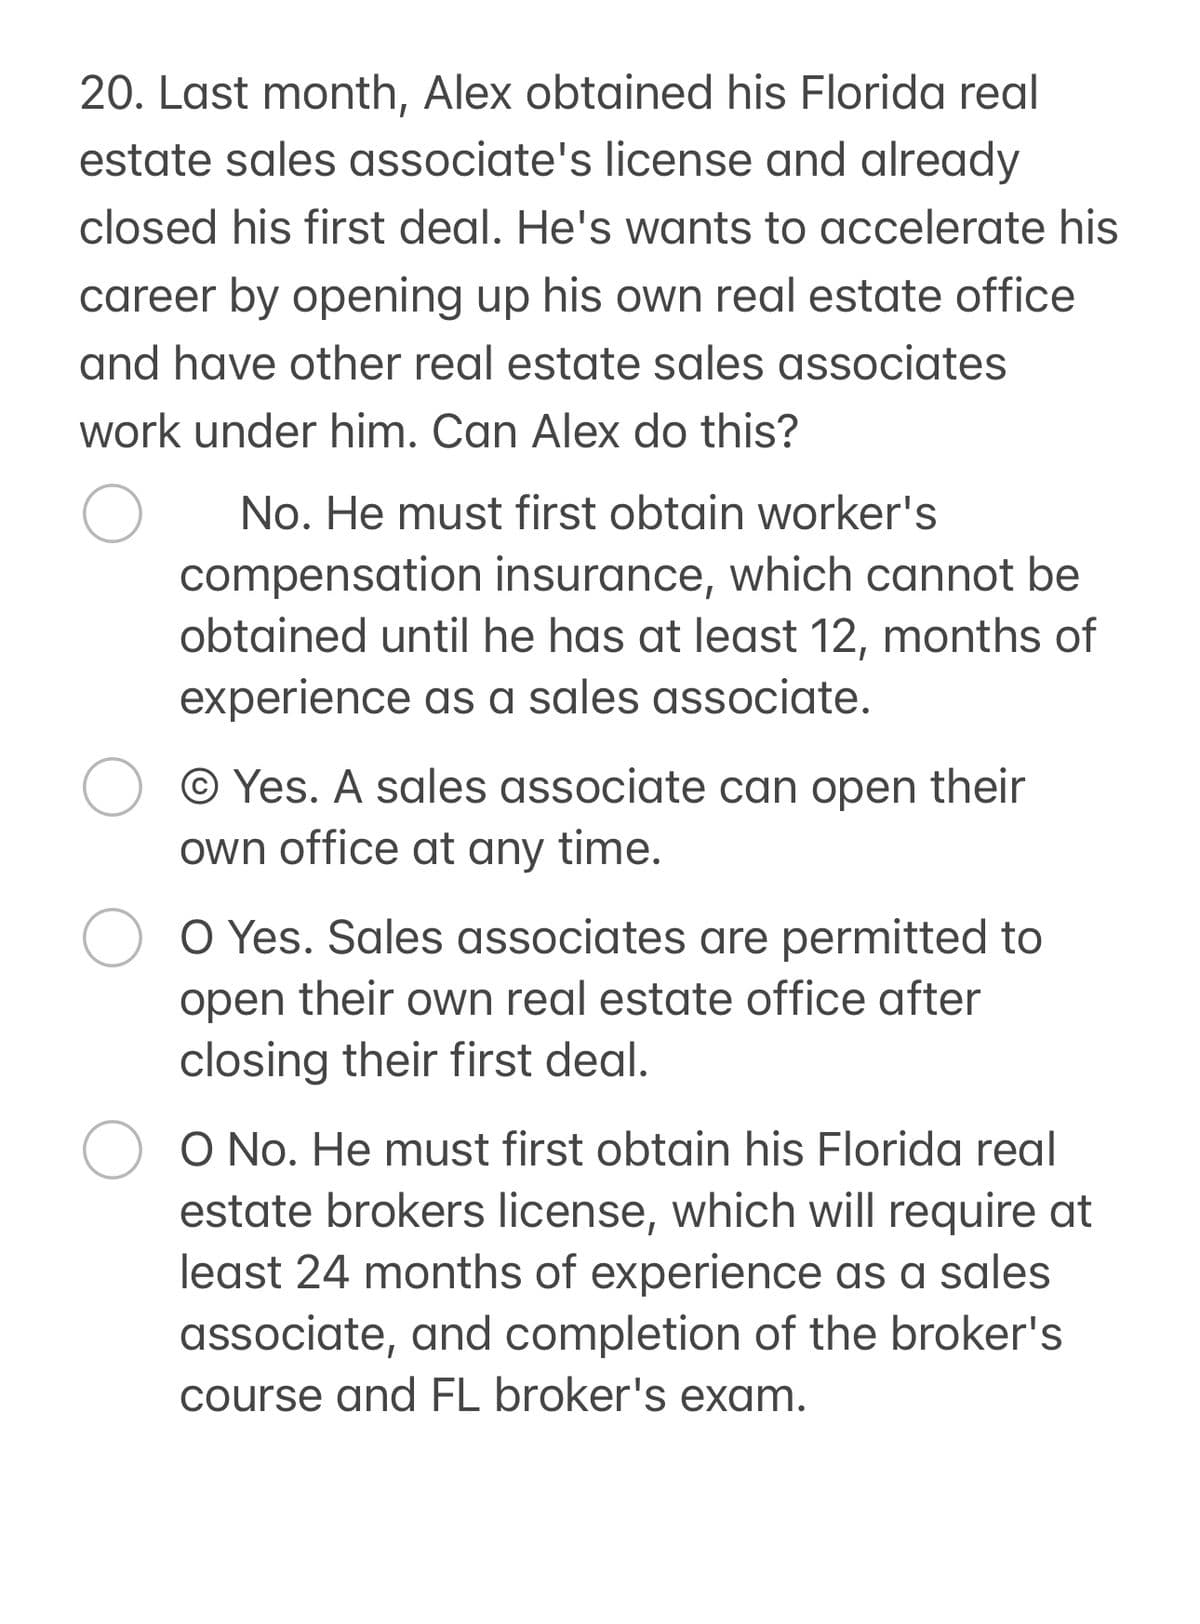 20. Last month, Alex obtained his Florida real
estate sales associate's license and already
closed his first deal. He's wants to accelerate his
career by opening up his own real estate office
and have other real estate sales associates
work under him. Can Alex do this?
No. He must first obtain worker's
compensation insurance, which cannot be
obtained until he has at least 12, months of
experience as a sales associate.
Yes. A sales associate can open their
own office at any time.
O Yes. Sales associates are permitted to
open their own real estate office after
closing their first deal.
○ ○ No. He must first obtain his Florida real
estate brokers license, which will require at
least 24 months of experience as a sales
associate, and completion of the broker's.
course and FL broker's exam.